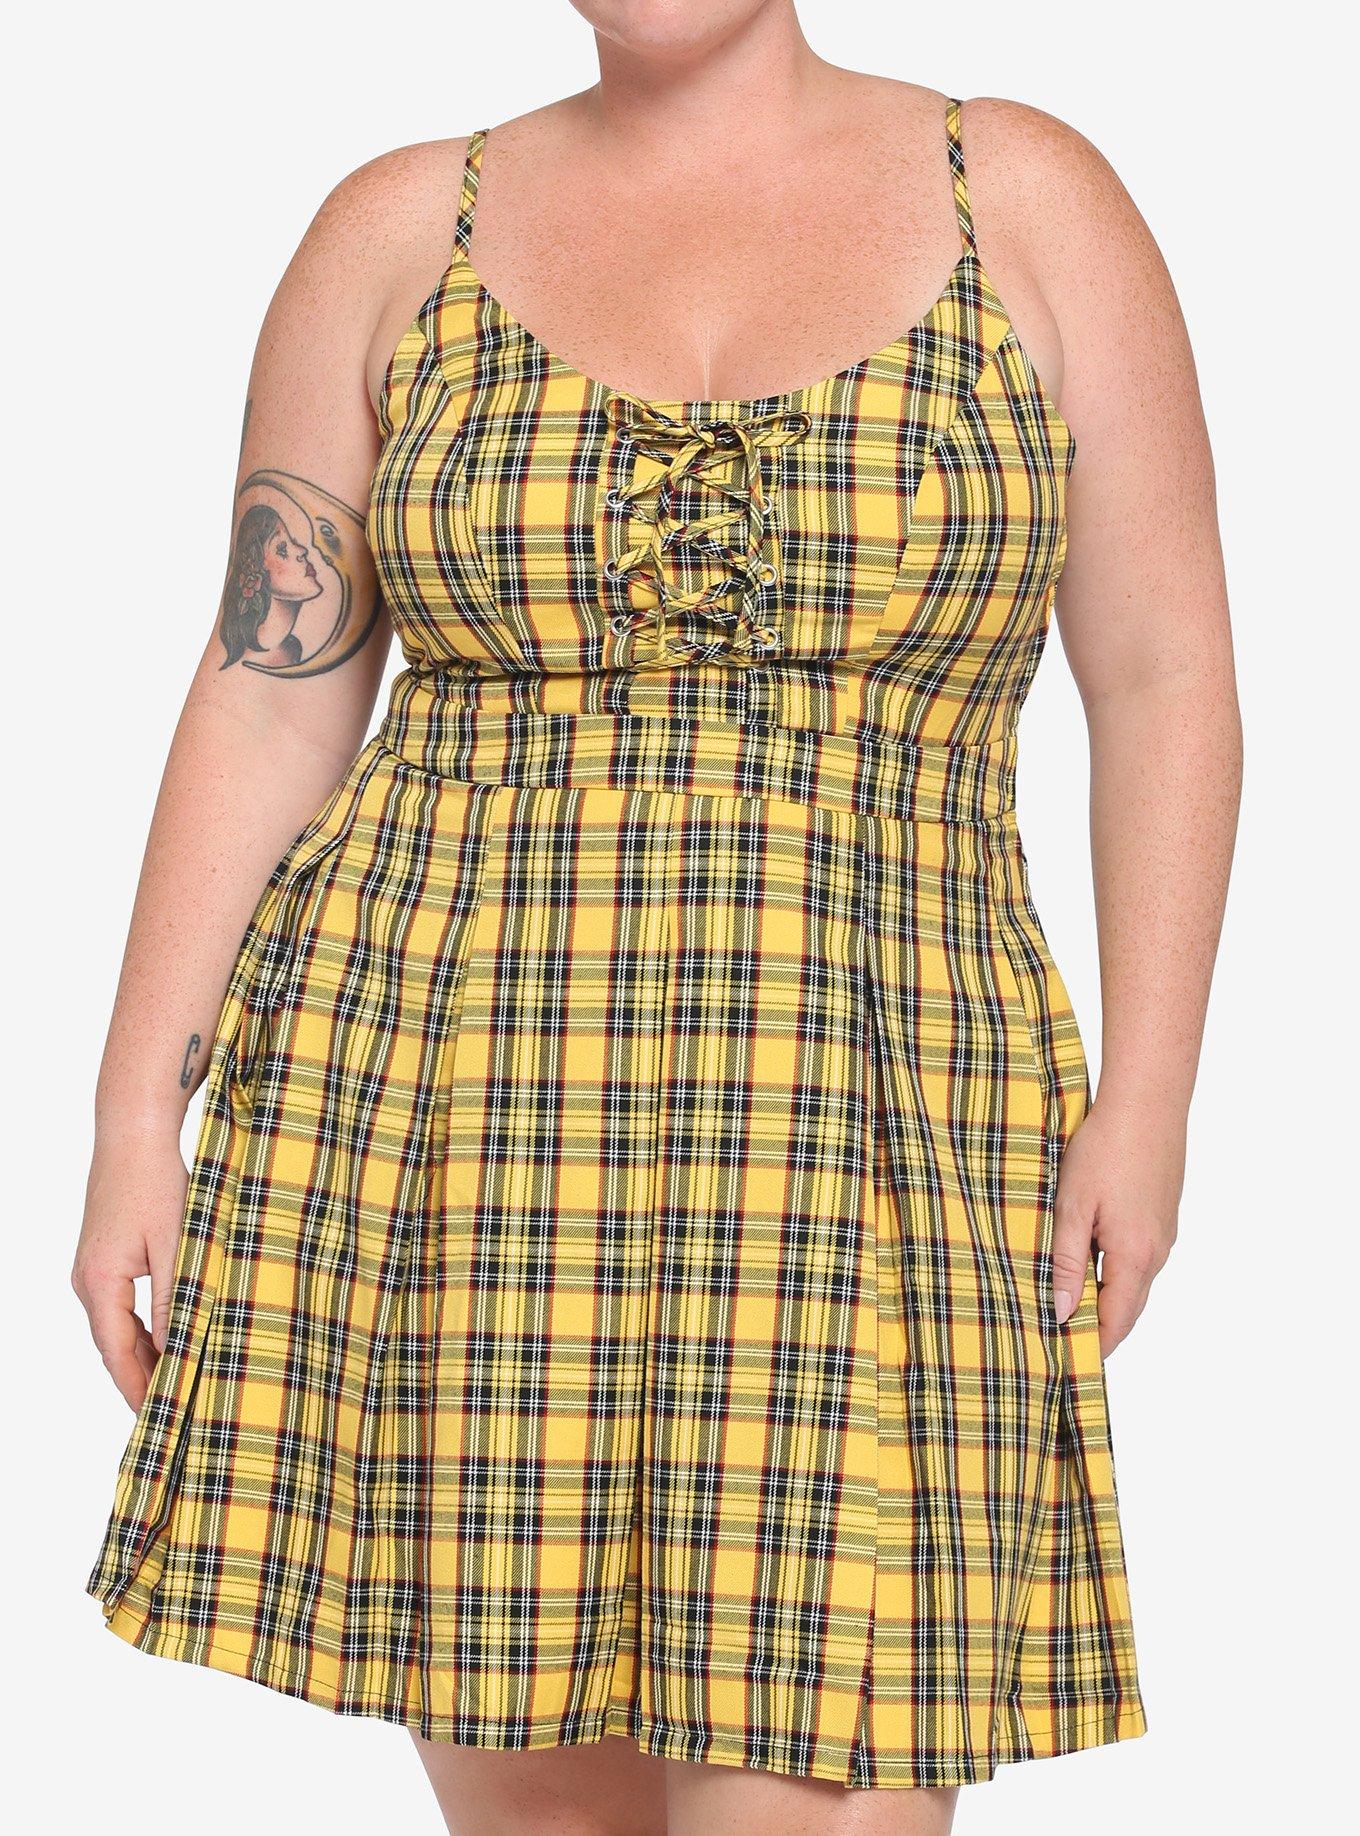 Yellow Plaid Lace-Up Pleated Dress Plus Size, PLAID - YELLOW, hi-res